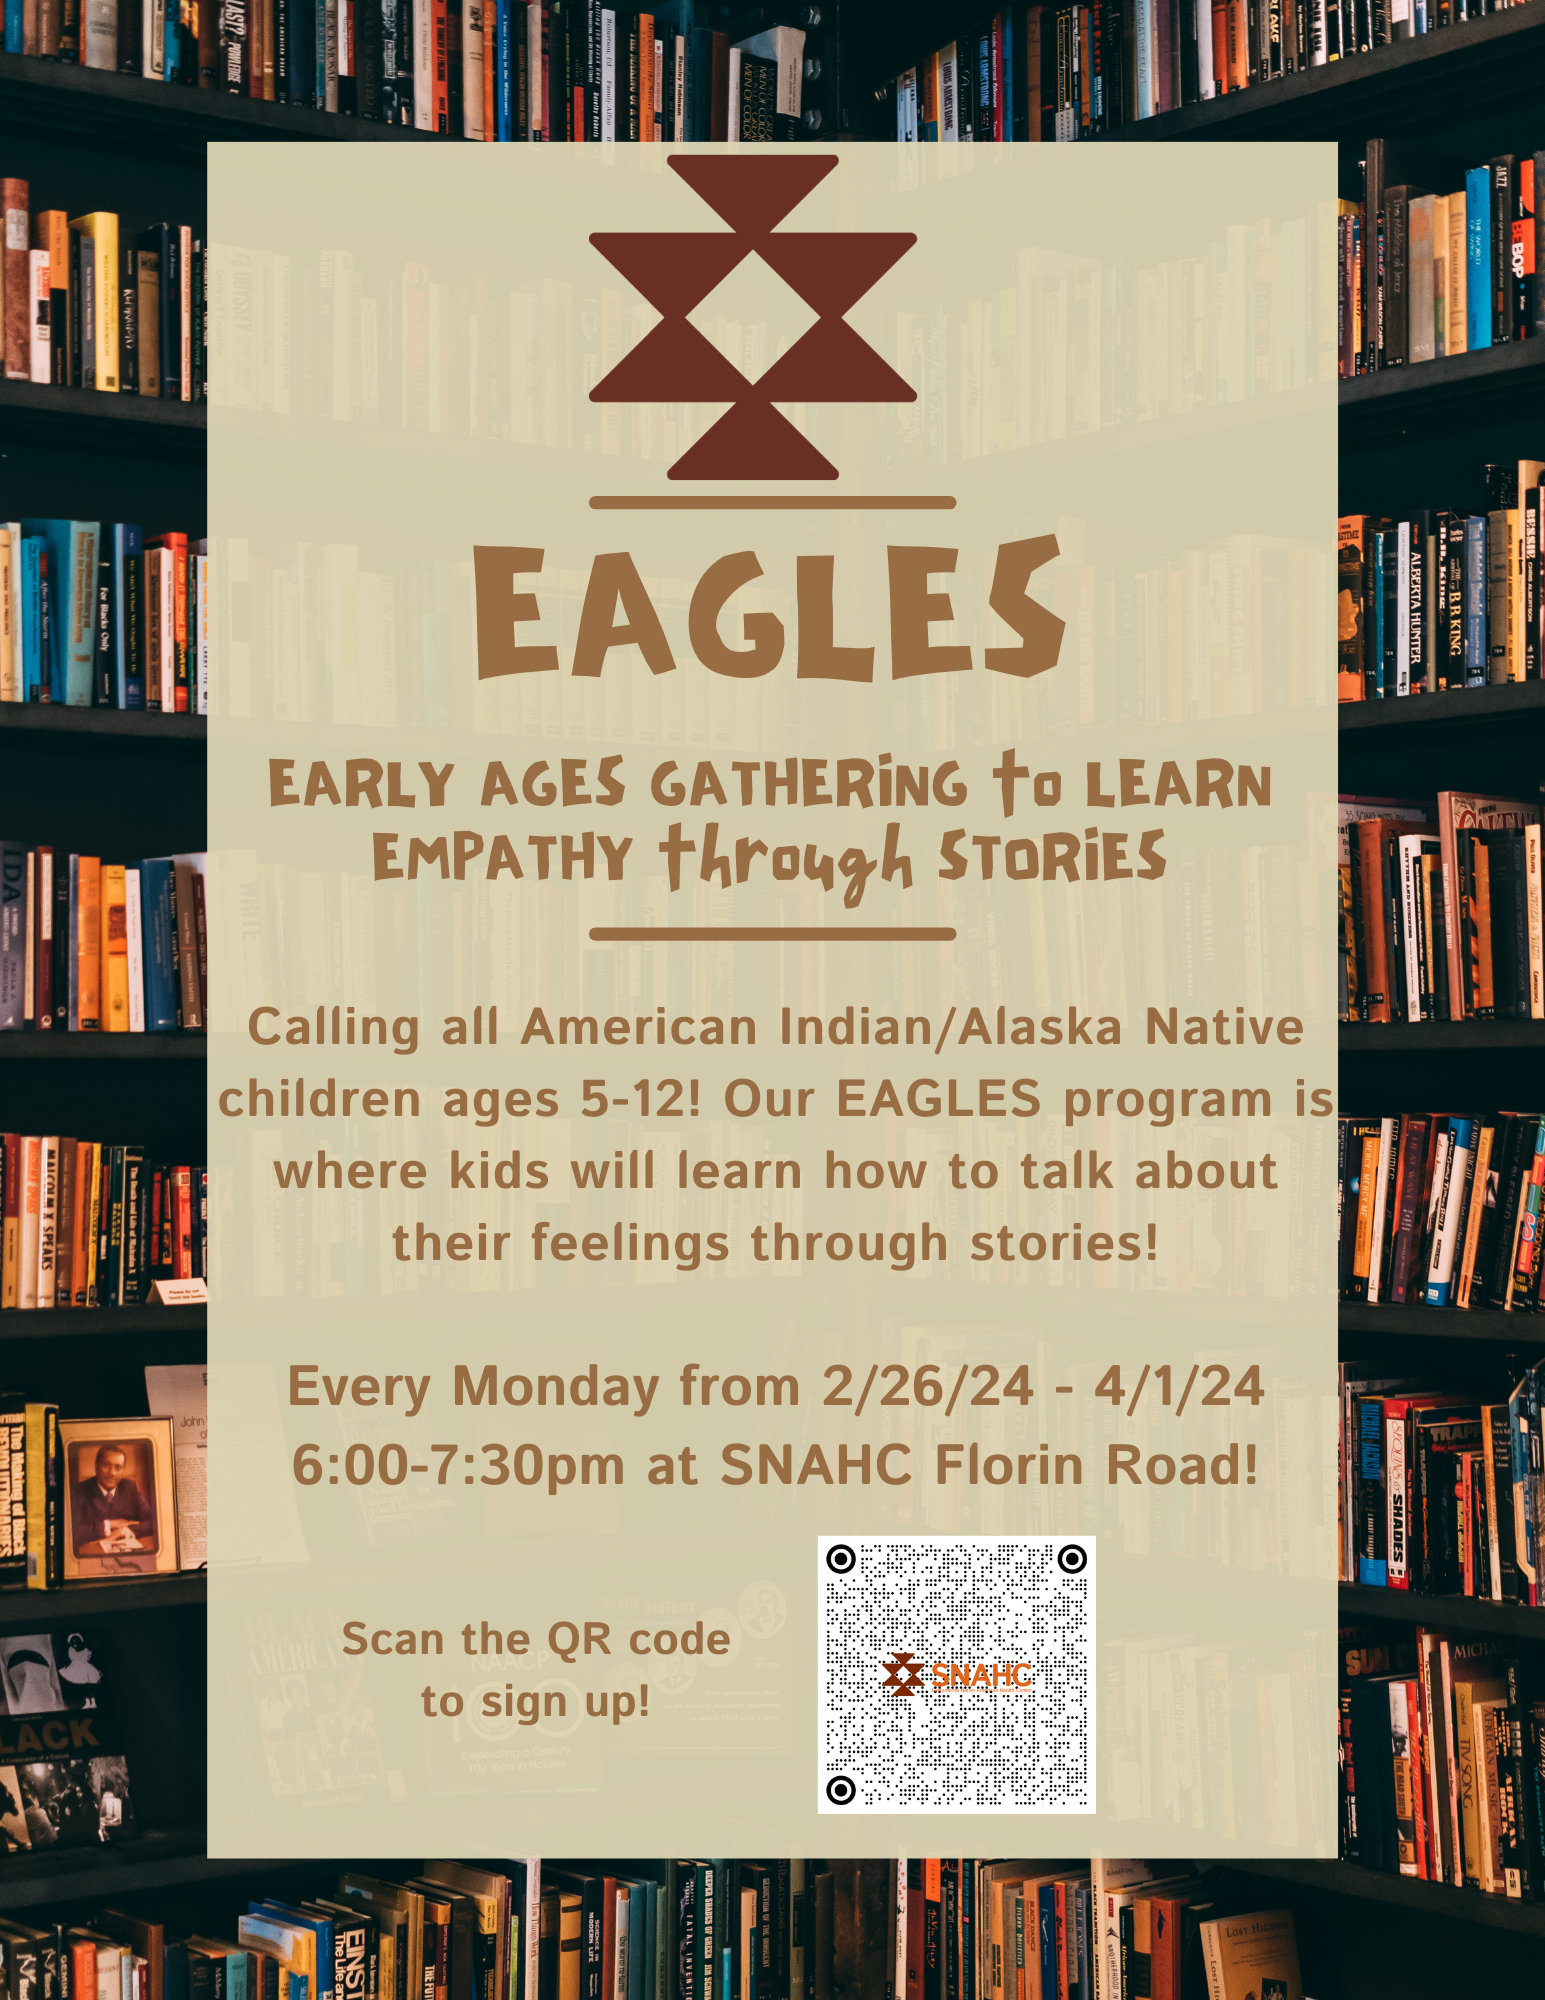 Early Ages Gathering to Learn Empathy through Stories (EAGLES) flyer. For ages 5-12 years old taking place every Monday from 2/26/24 - 4/1/24 at SNAHC Florin Road from 6:00 pm - 7:30 pm.